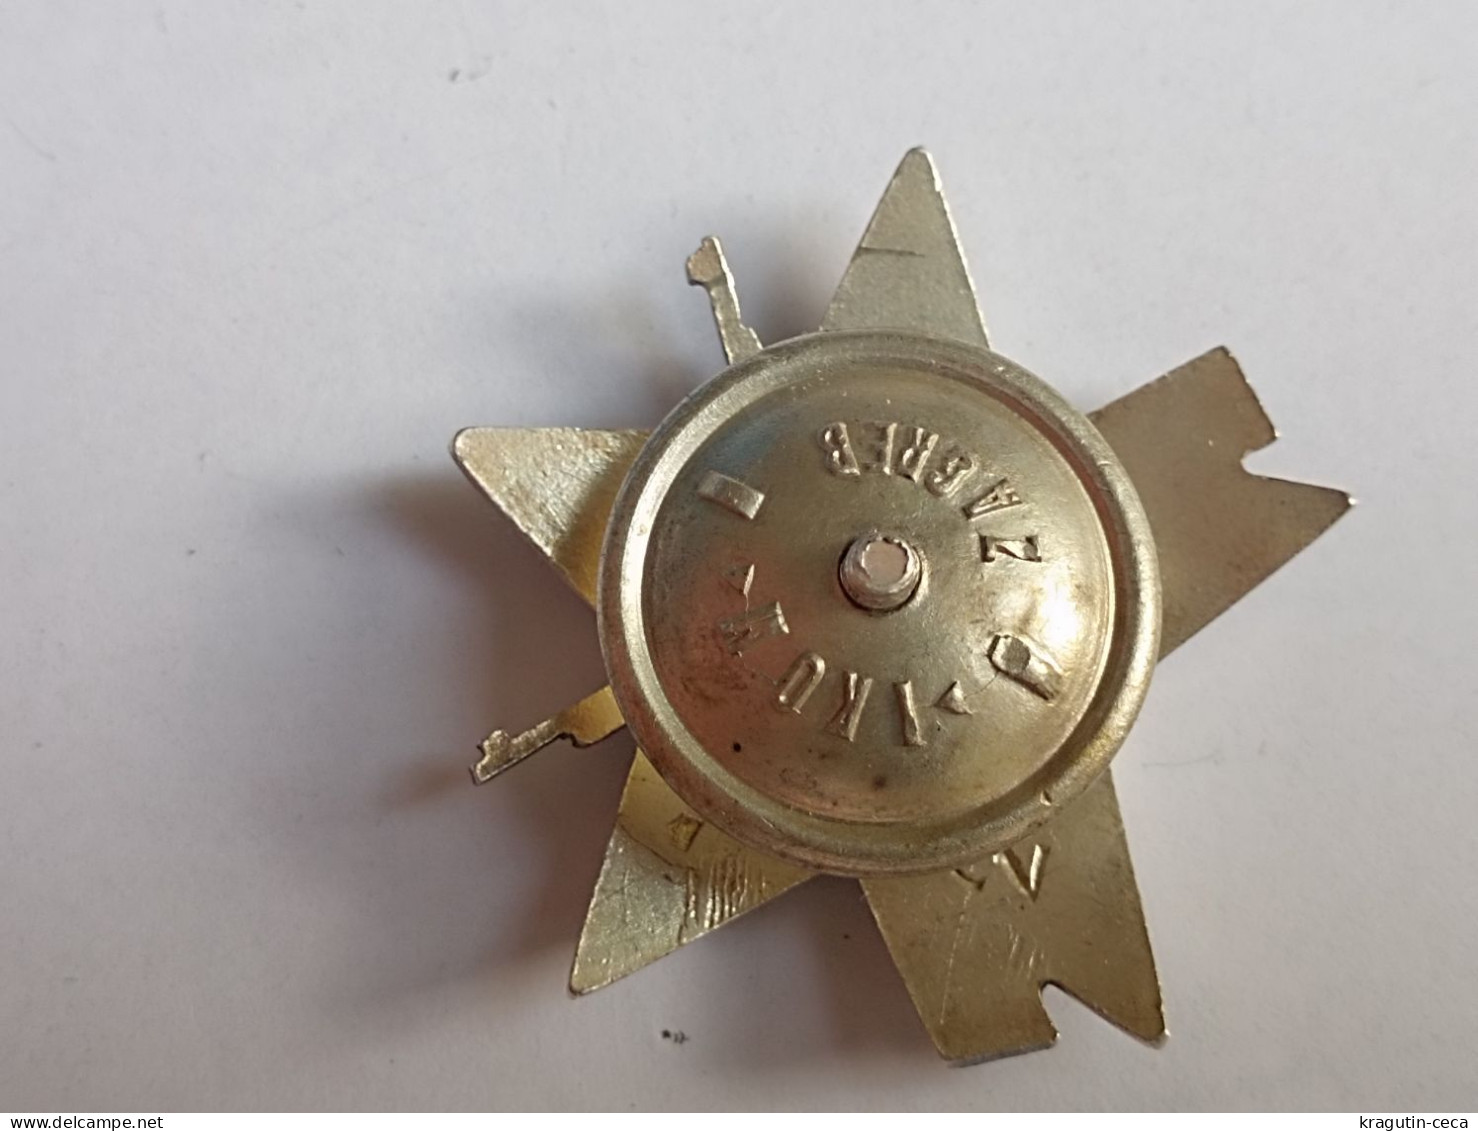 Yugoslavia JNA Order of Partisan Star with CROSSED RIFLES 2nd class Monetni Dvor USSR RUSSIA  with number